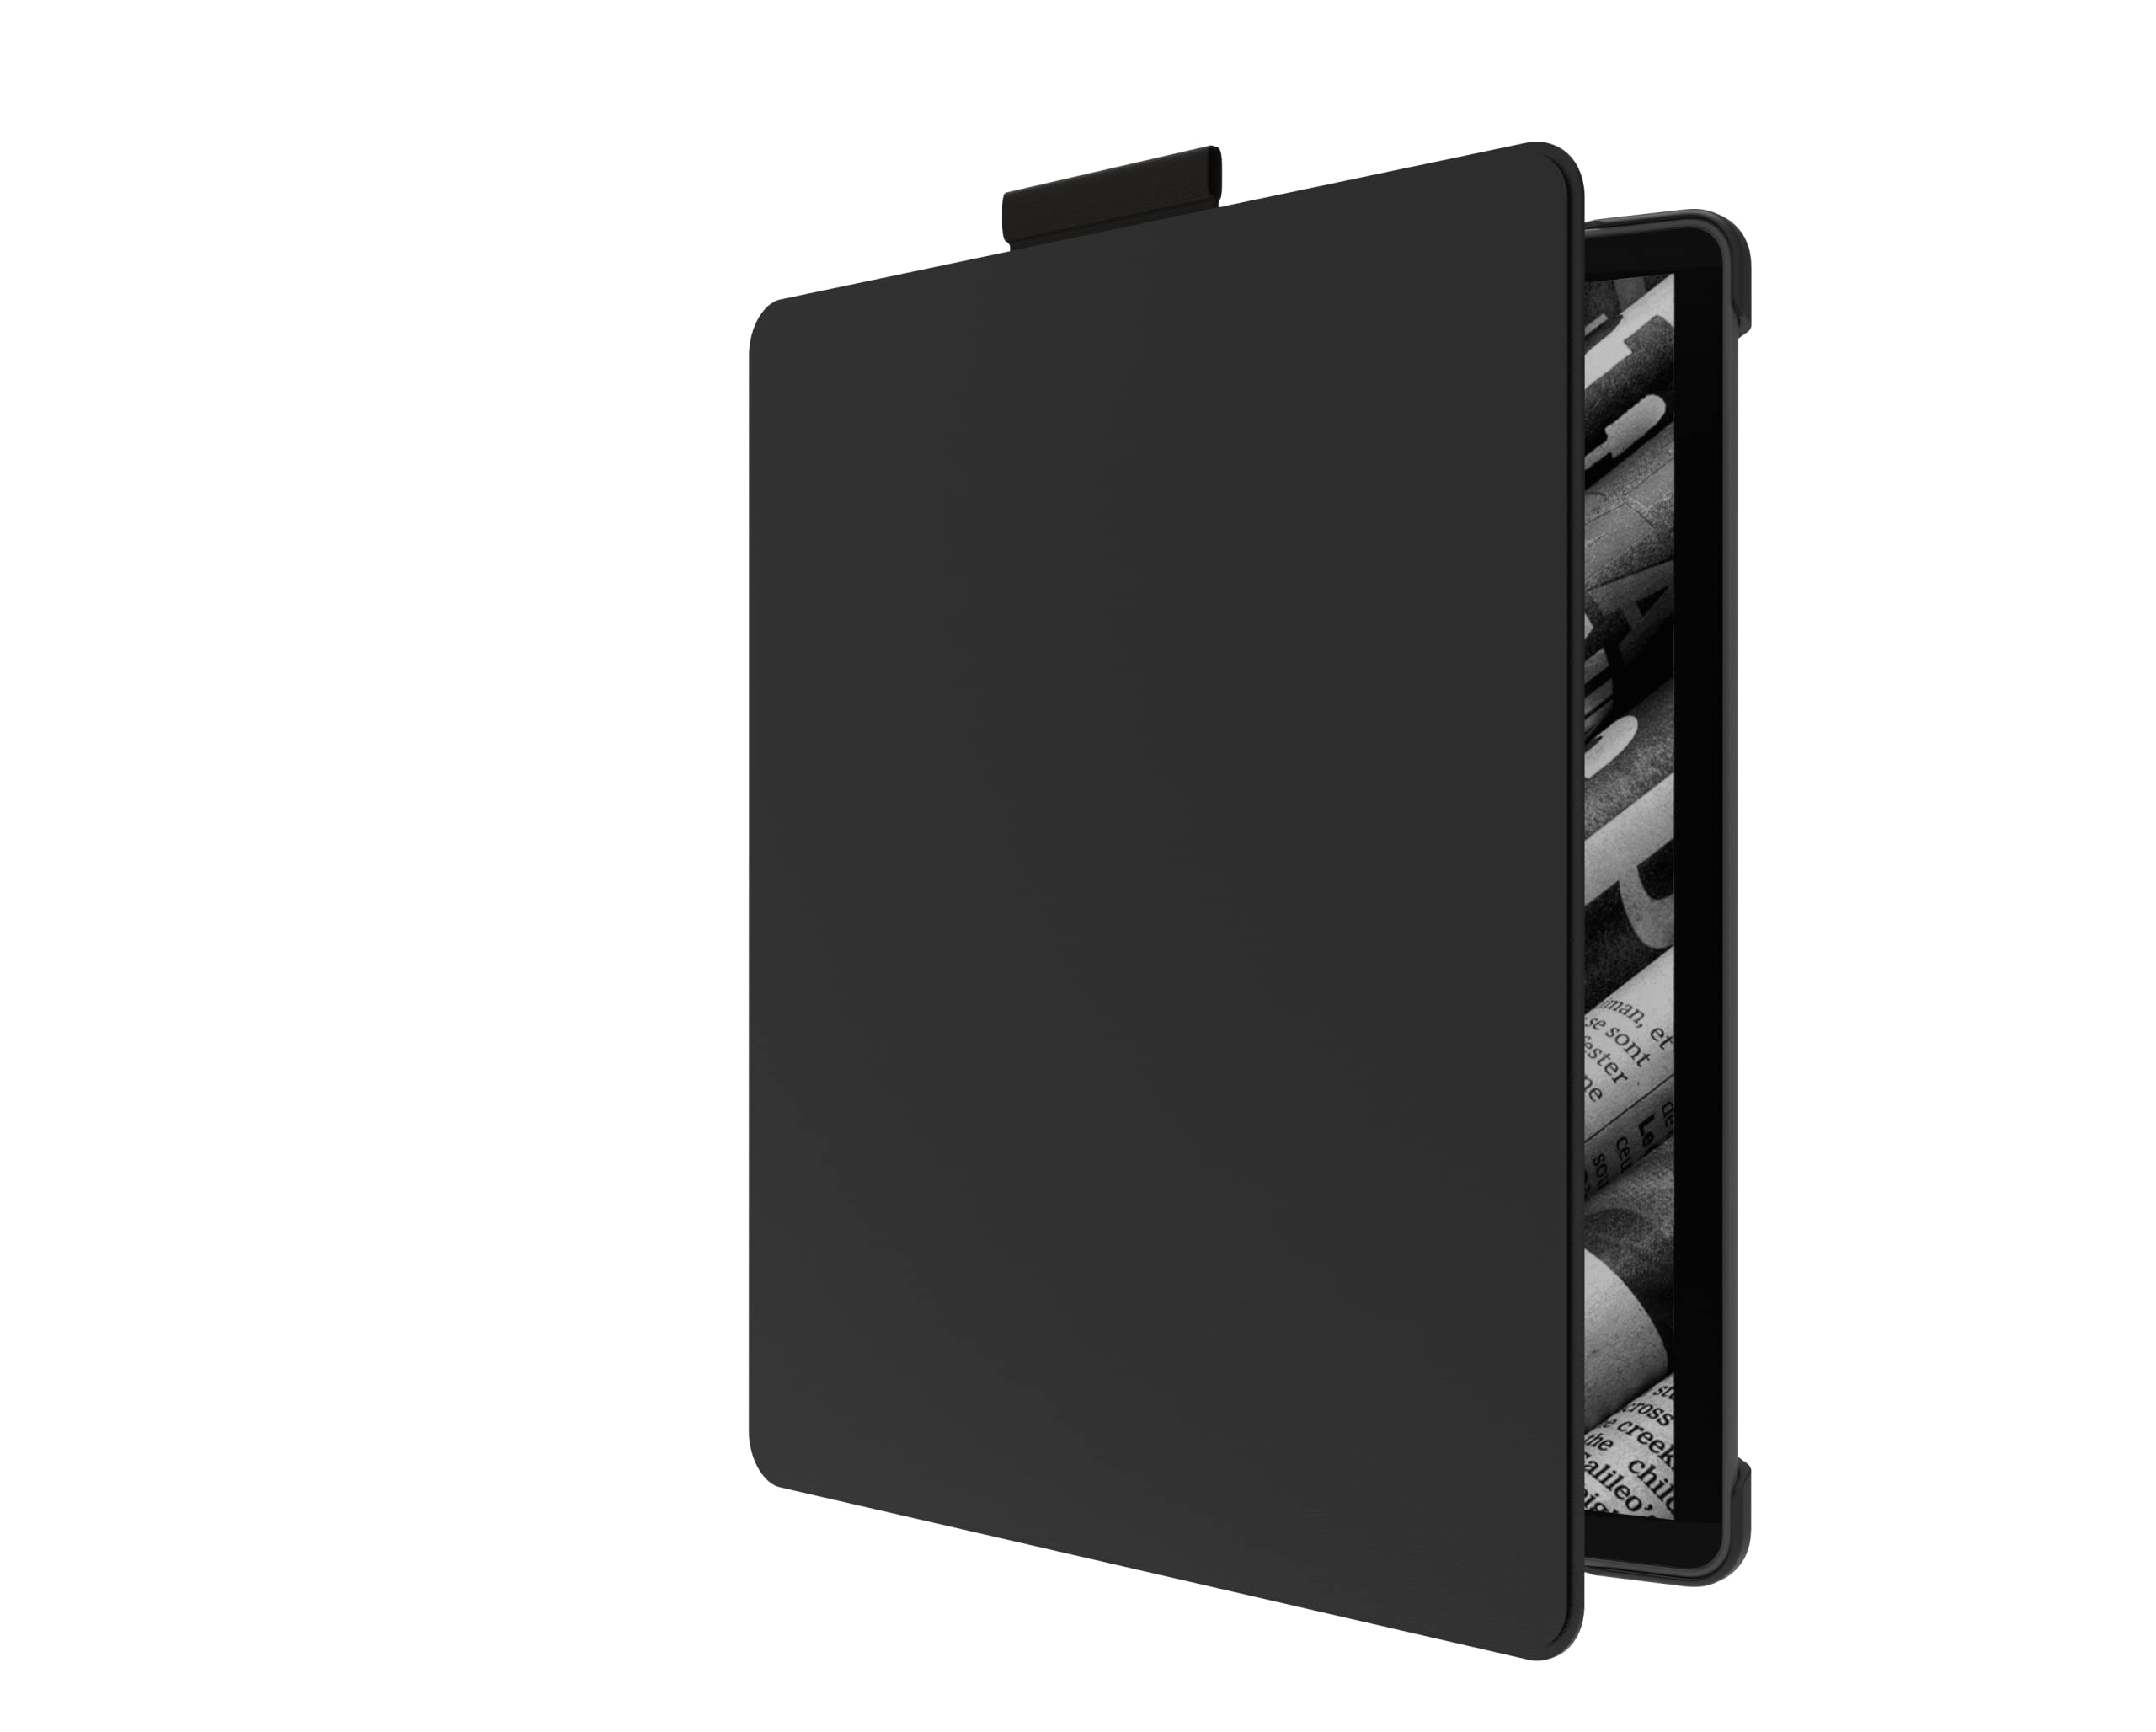 Kindle Scribe Bundle. Includes Kindle Scribe (32 GB), Premium Pen, and NuPro Bookcover in Black